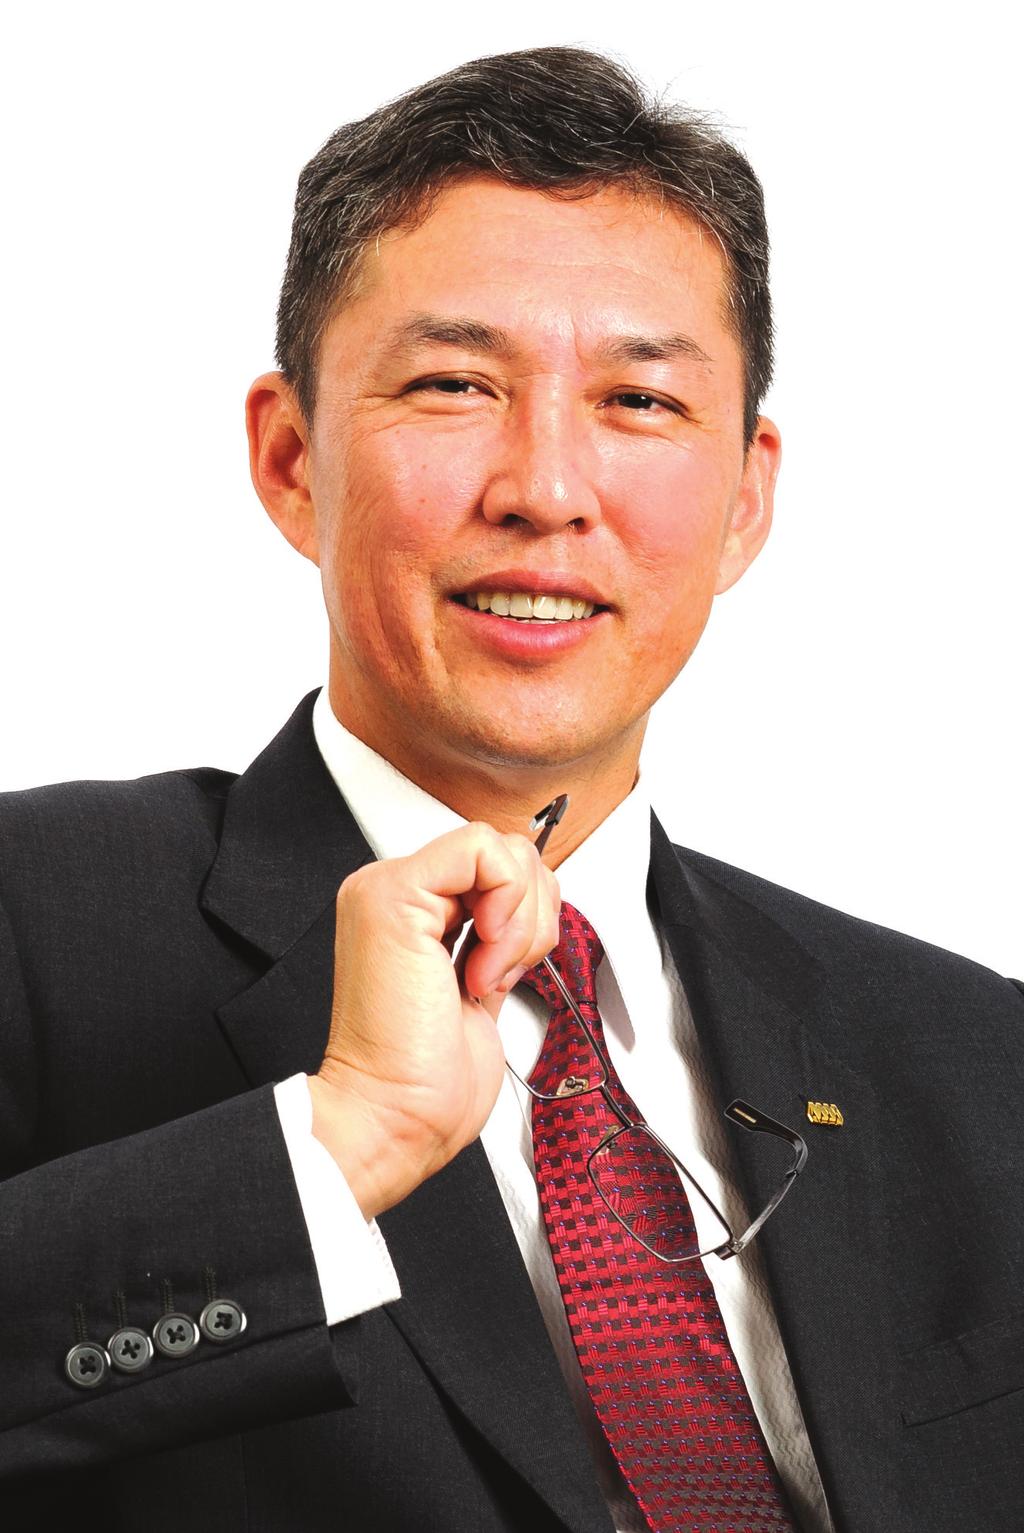 11 Mr Onn Kien Hoe was appointed as an Independent Non-Executive Director and Chairman of the Audit Committee of the Company on 5 September 2012.